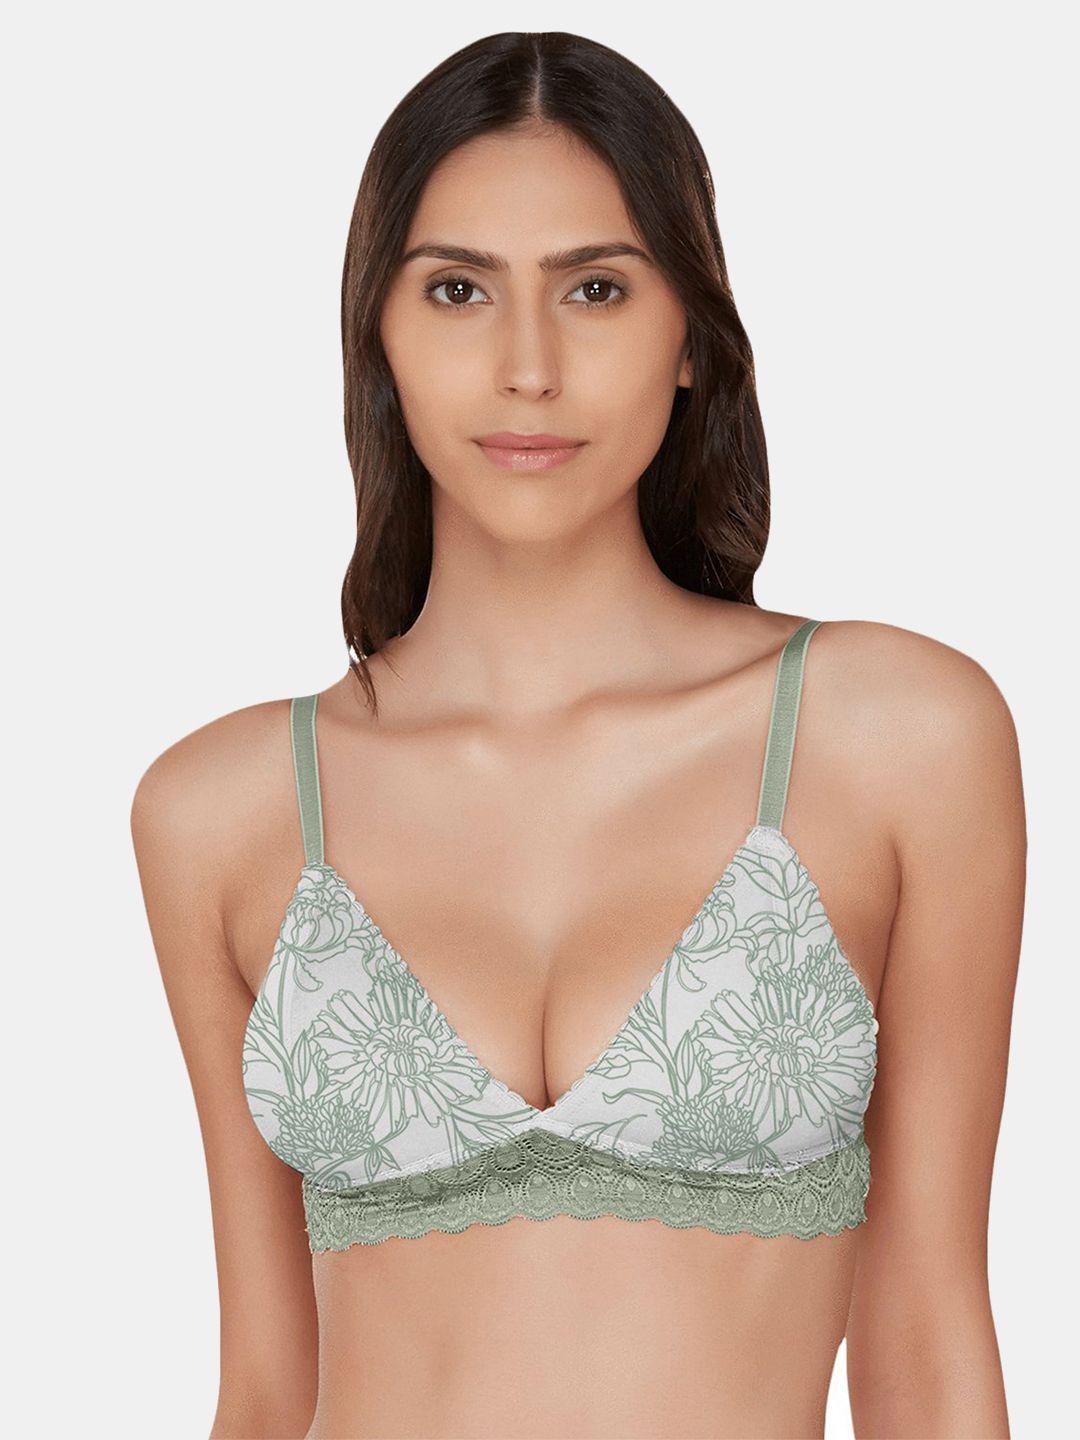 inner-sense-green-&-white-antimicrobial-organic-cotton-lightly-padded-sustainable-bralette-isb095